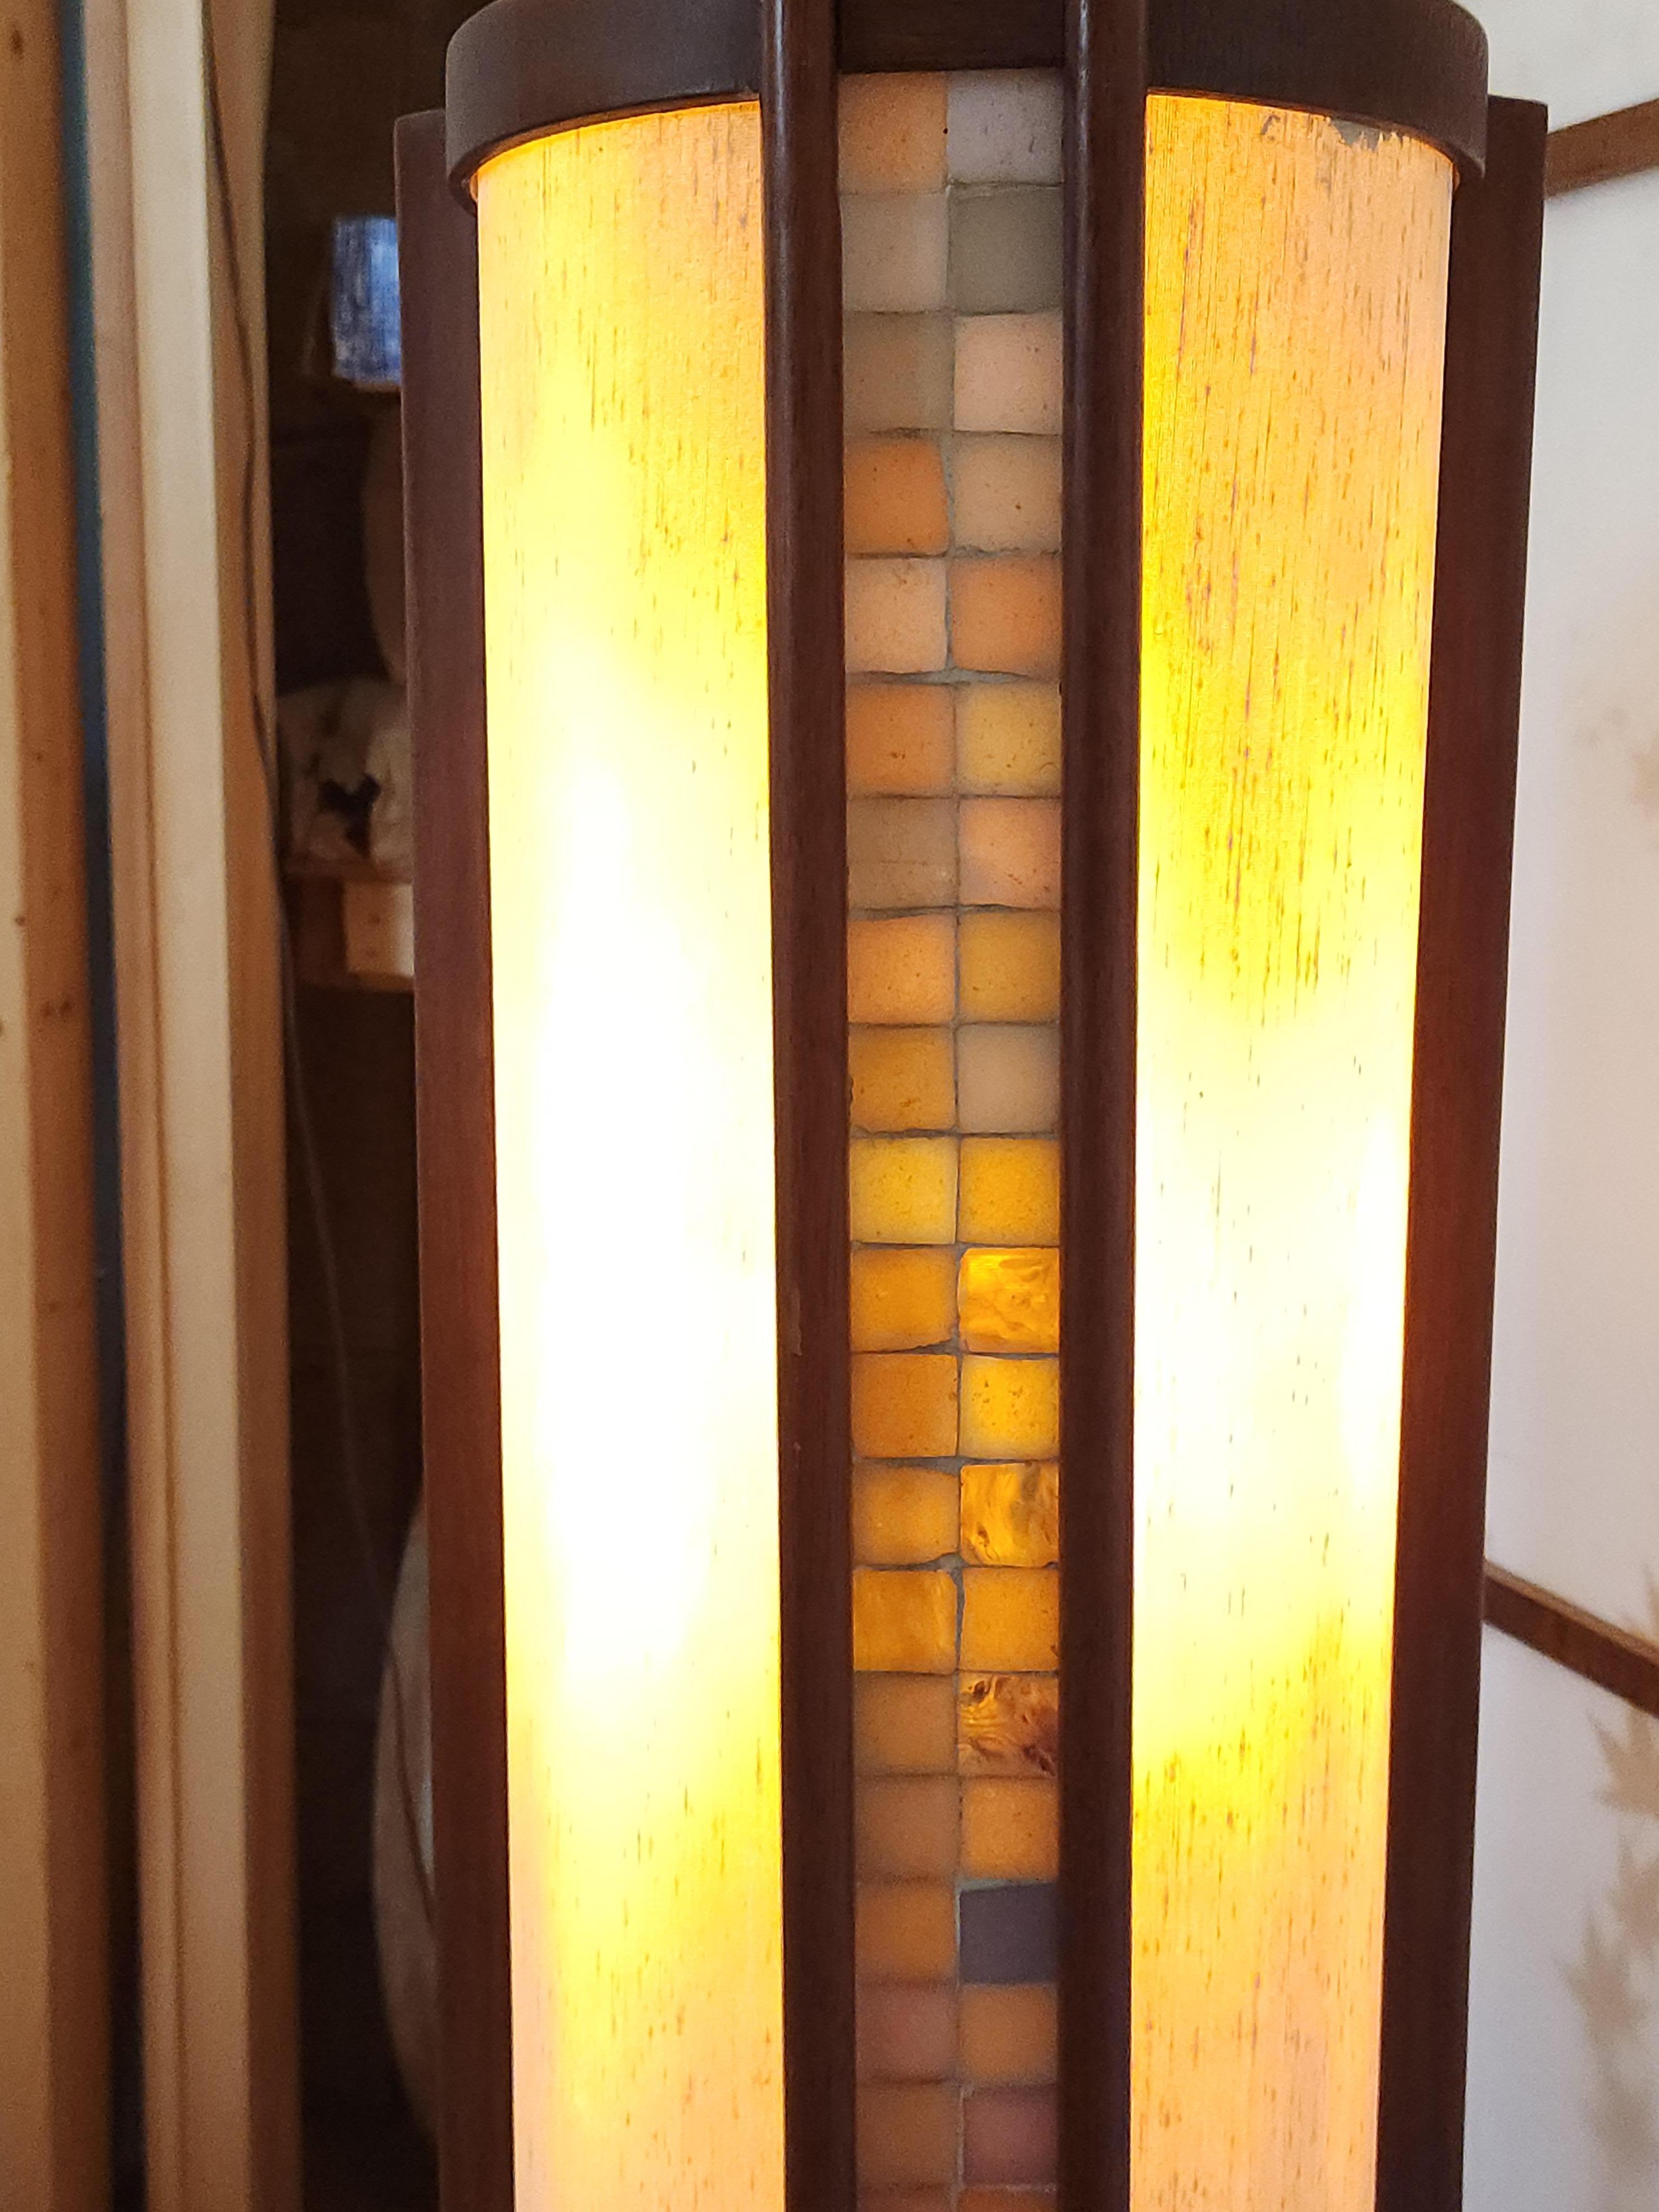 Walnut Martin Borenstein Cylindrical Lamp with Glass Tile Panels, circa 1952 For Sale 1